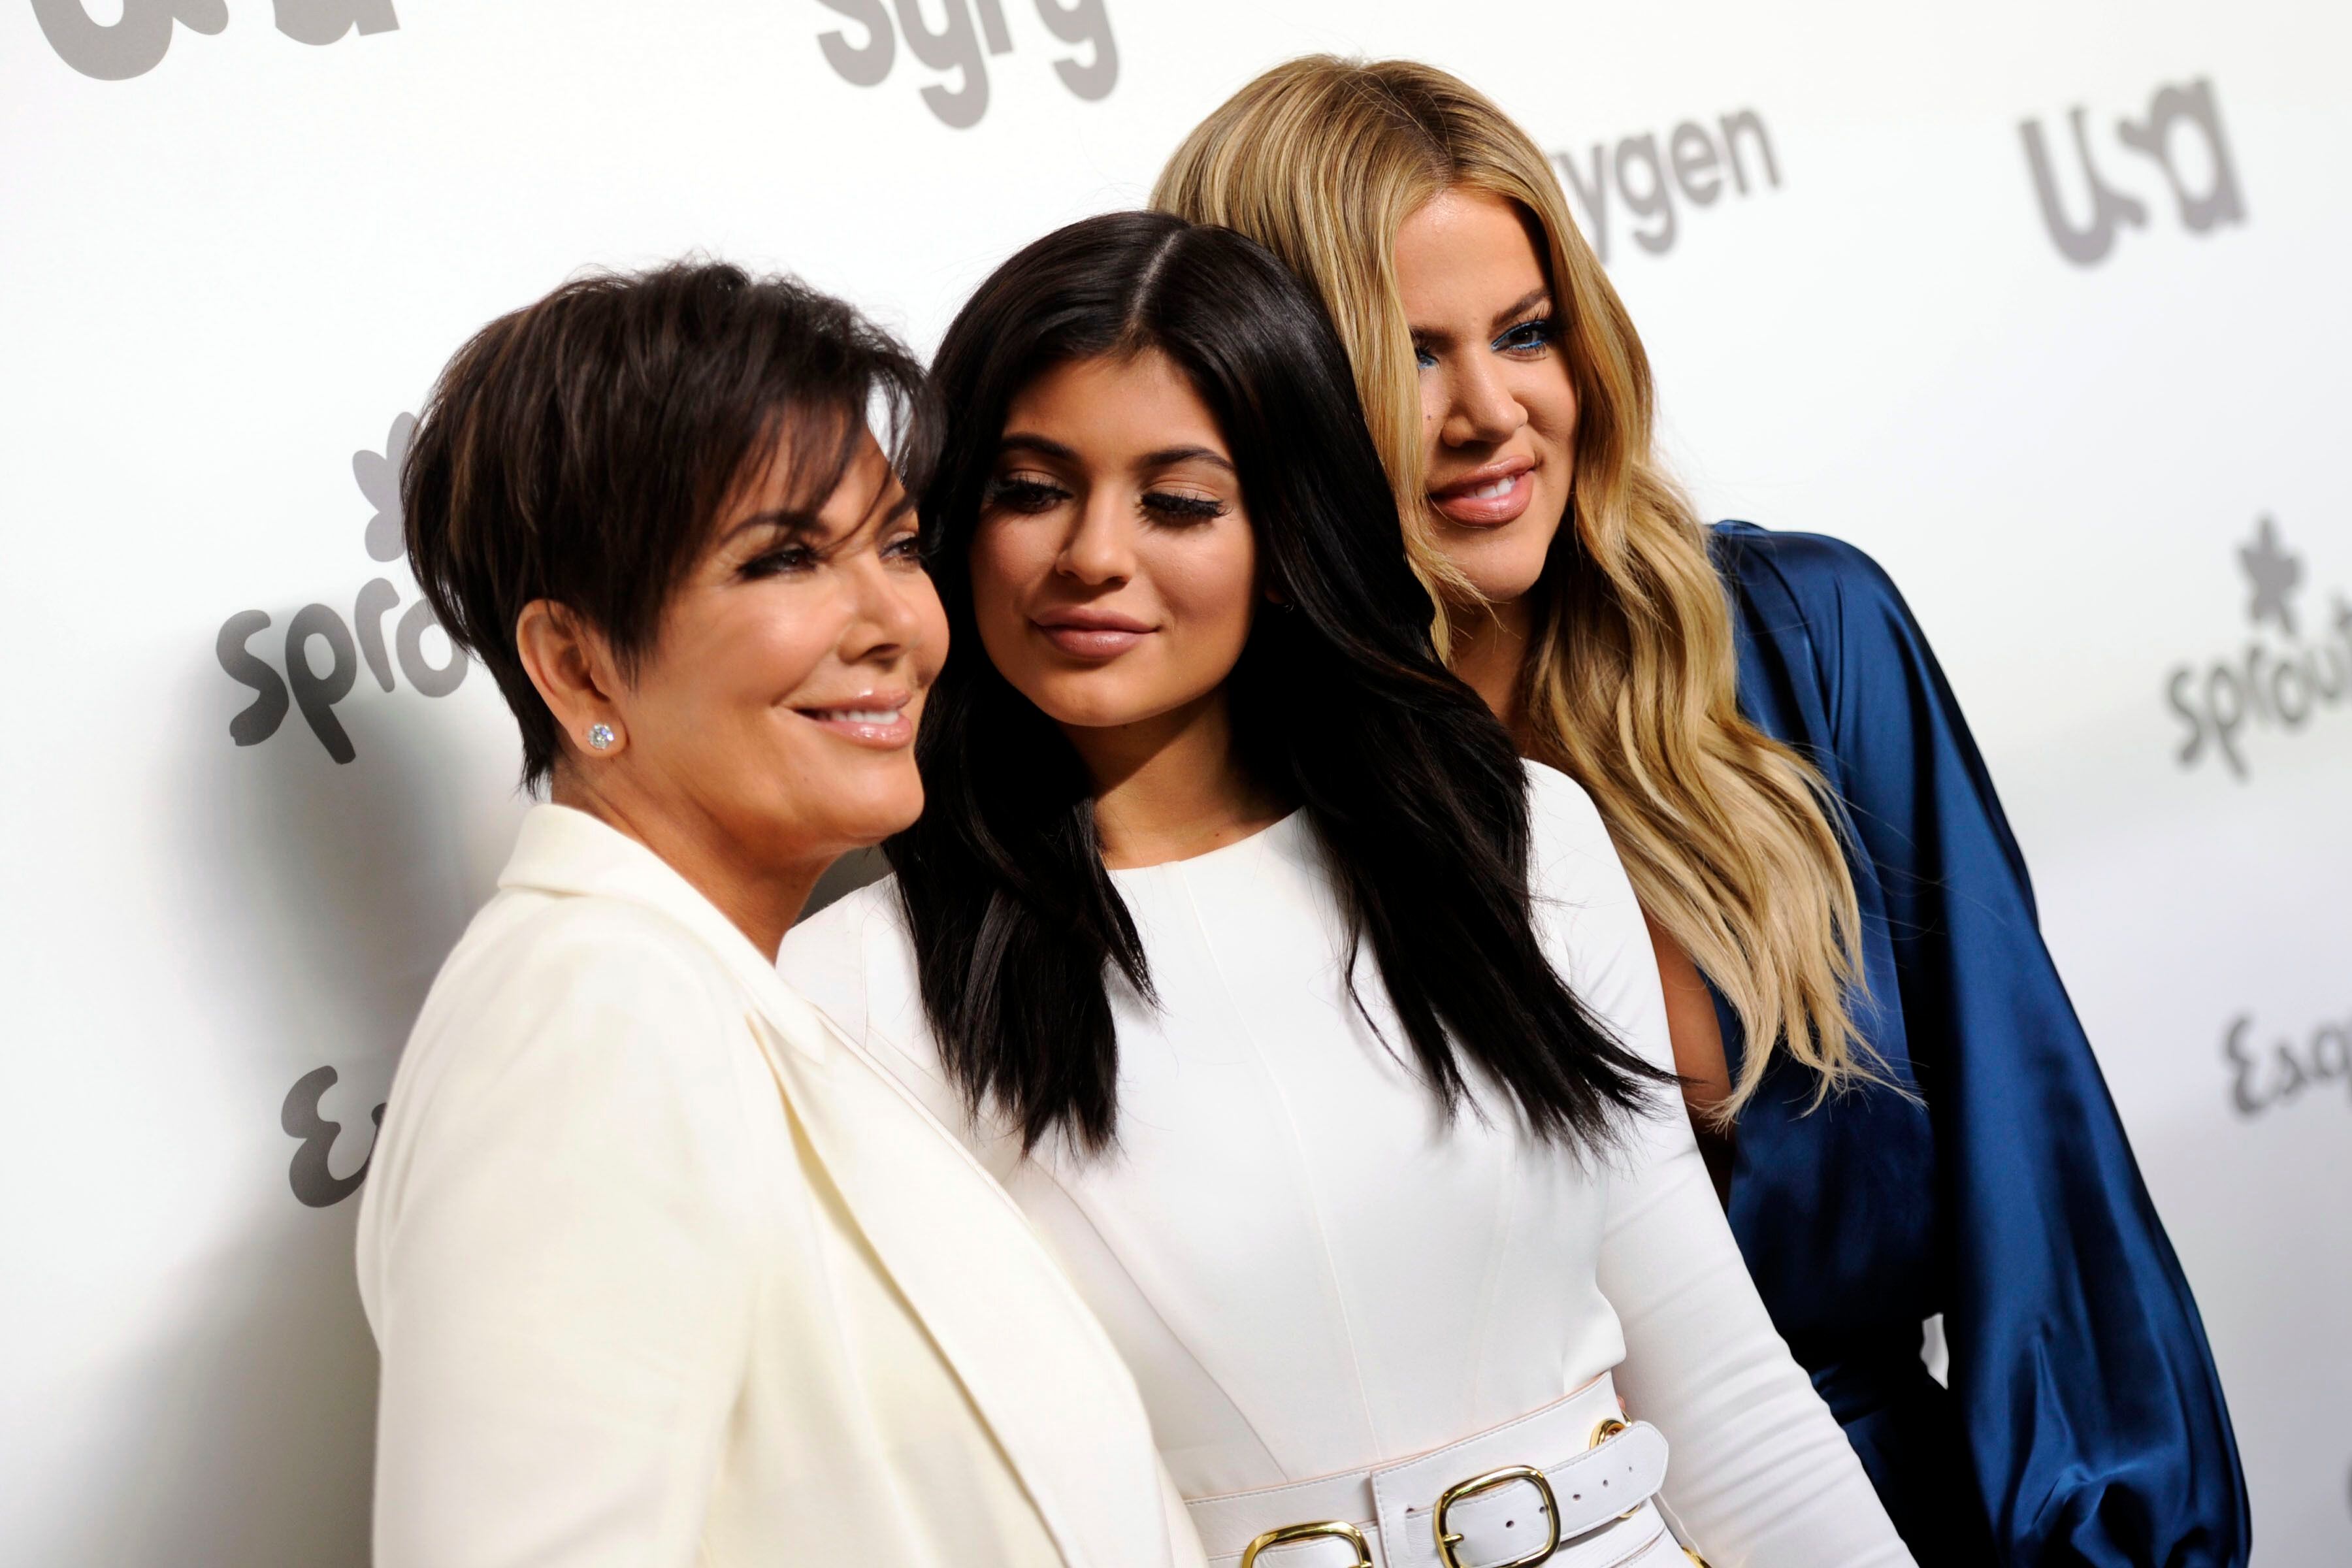 Kris Jenner says Blac Chyna tried to murder her son in 2016